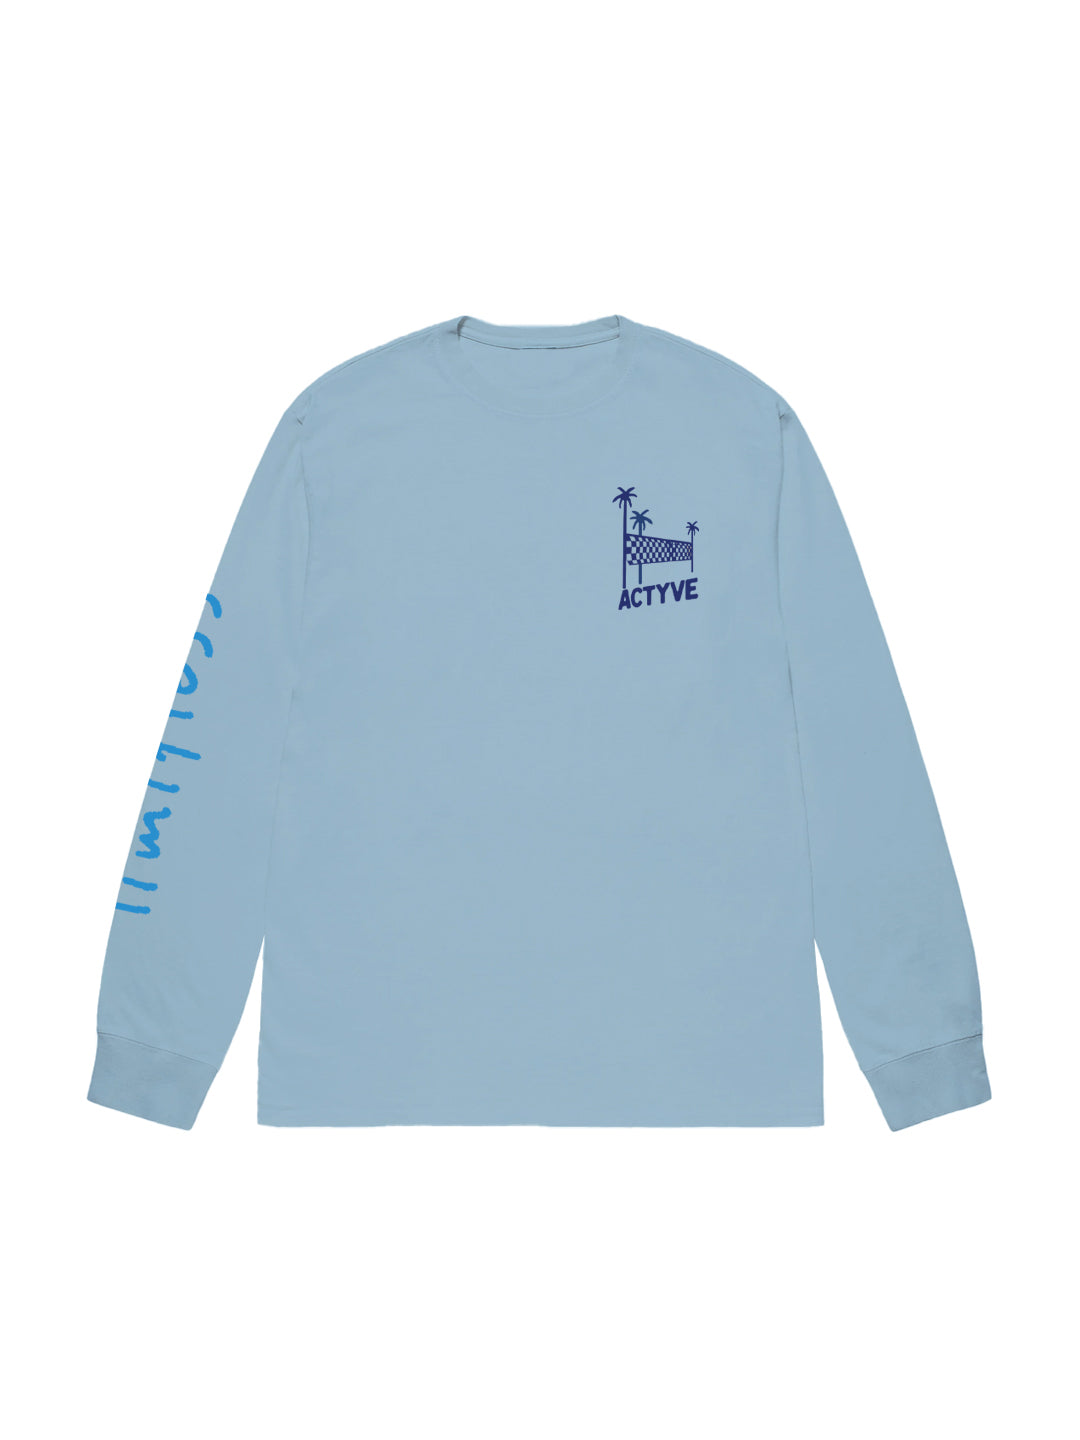 Actyve Long Sleeve Tee in Light Blue